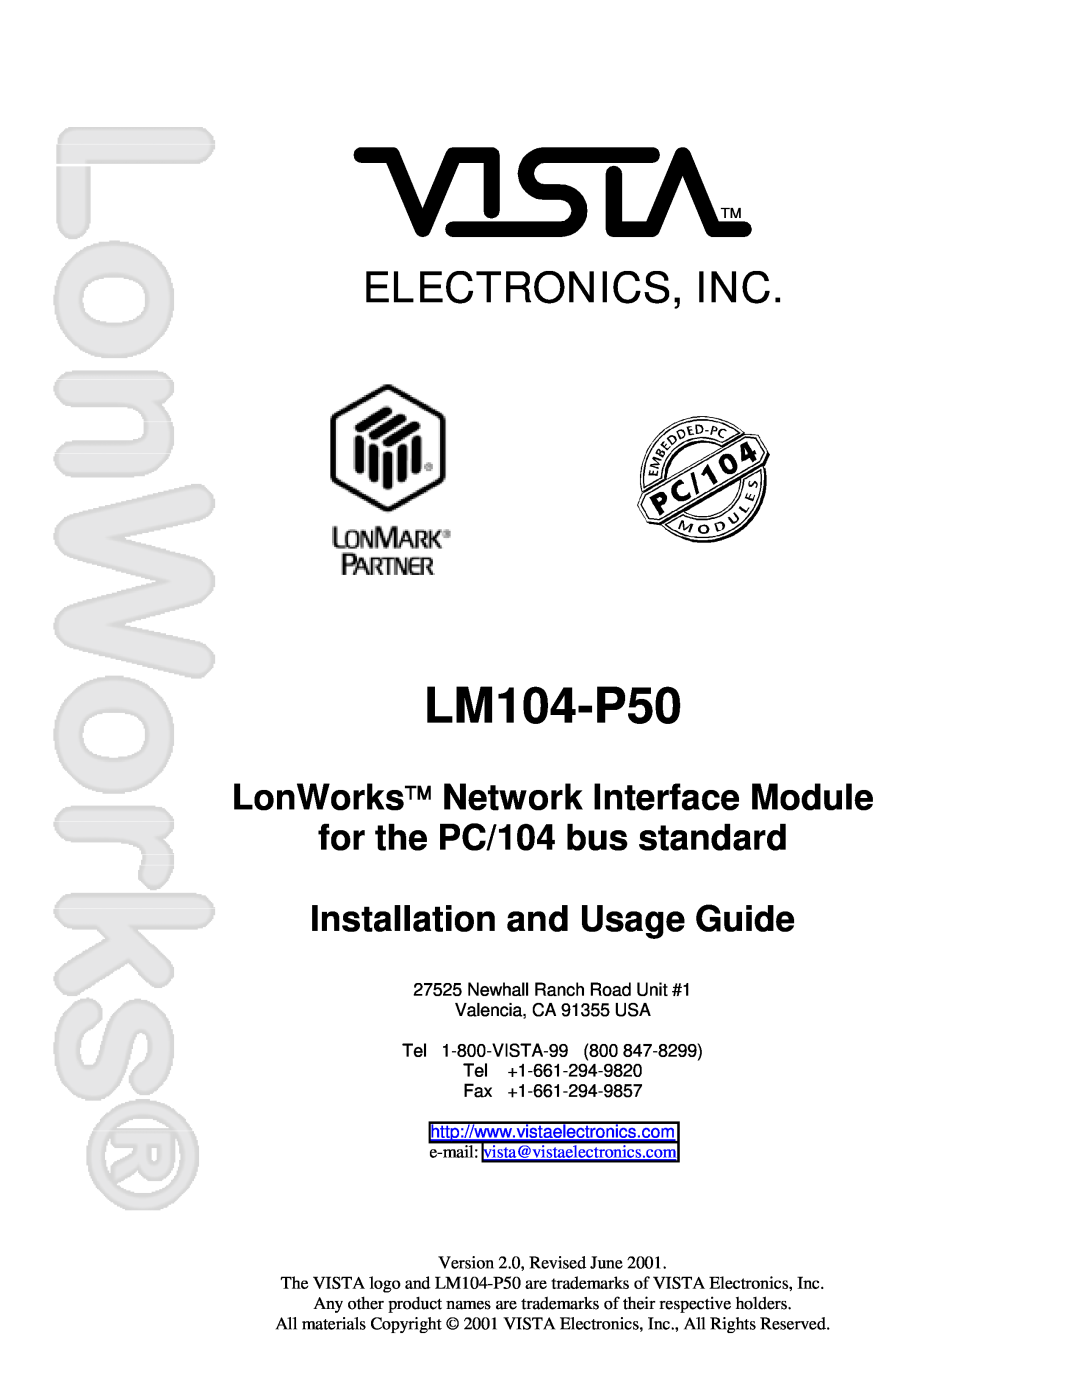 Vista LM104-P50 manual Electronics, Inc, LonWorks Network Interface Module for the PC/104 bus standard 